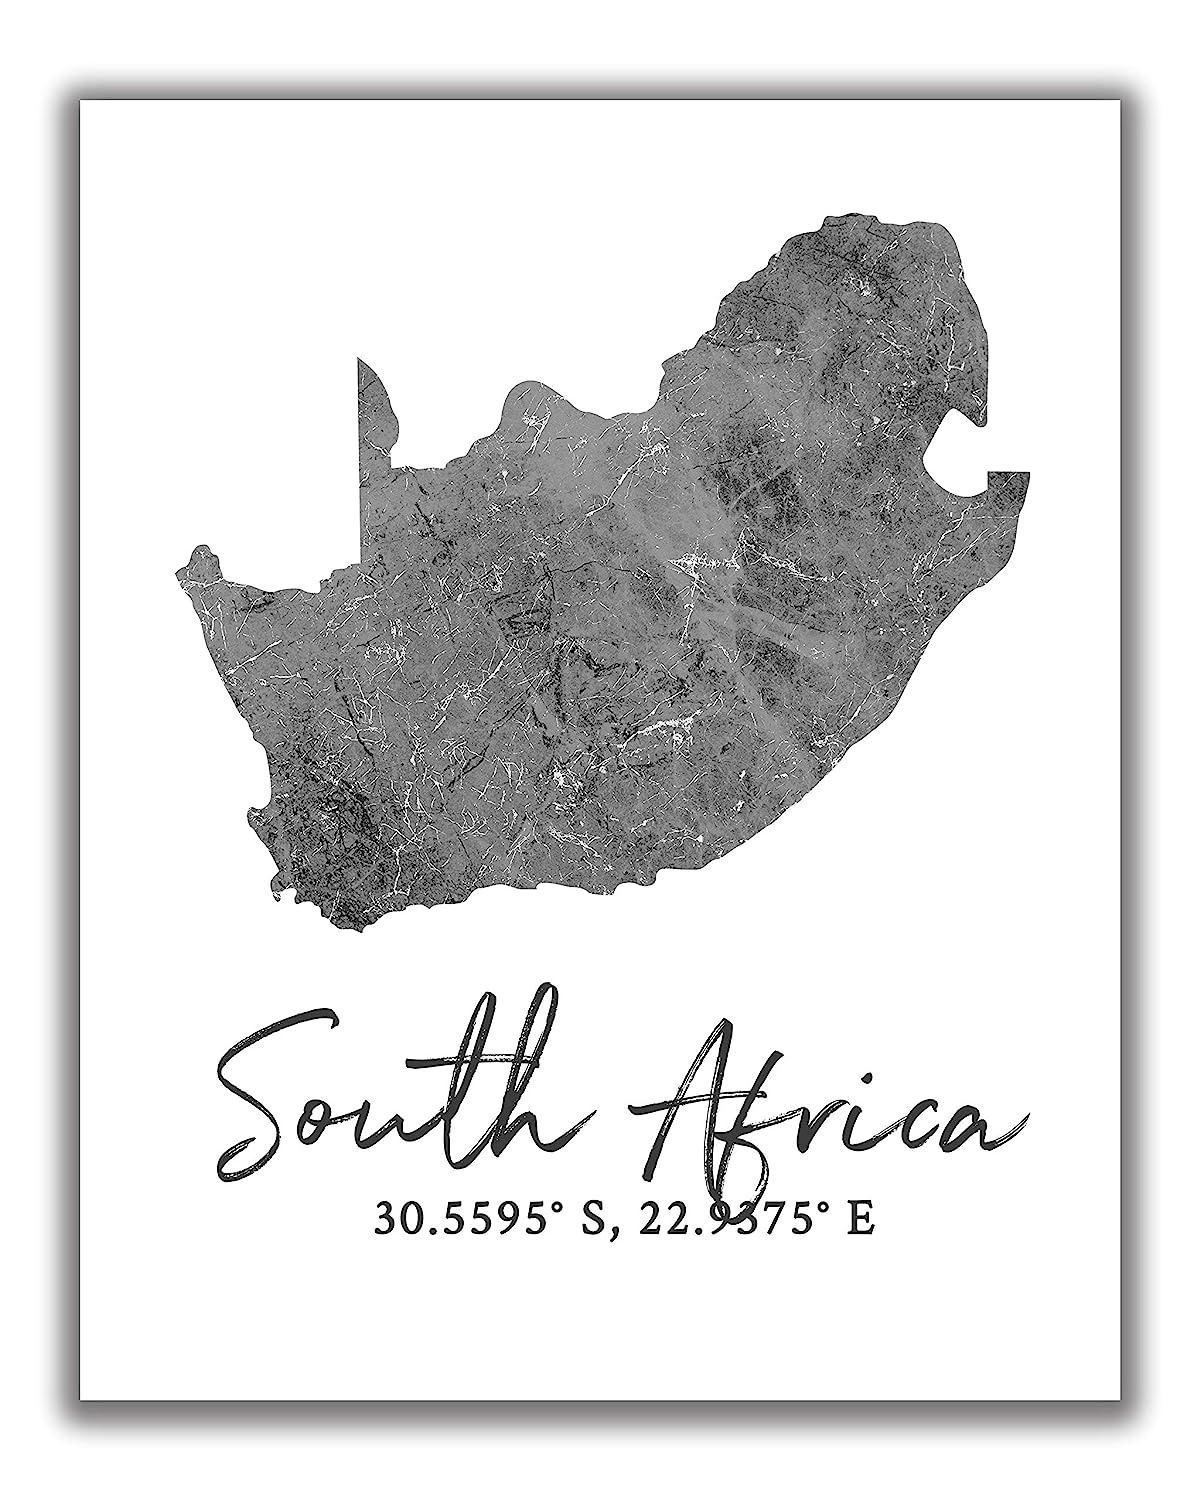 South Africa Map Wall Art Print - 8x10 Silhouette [...]